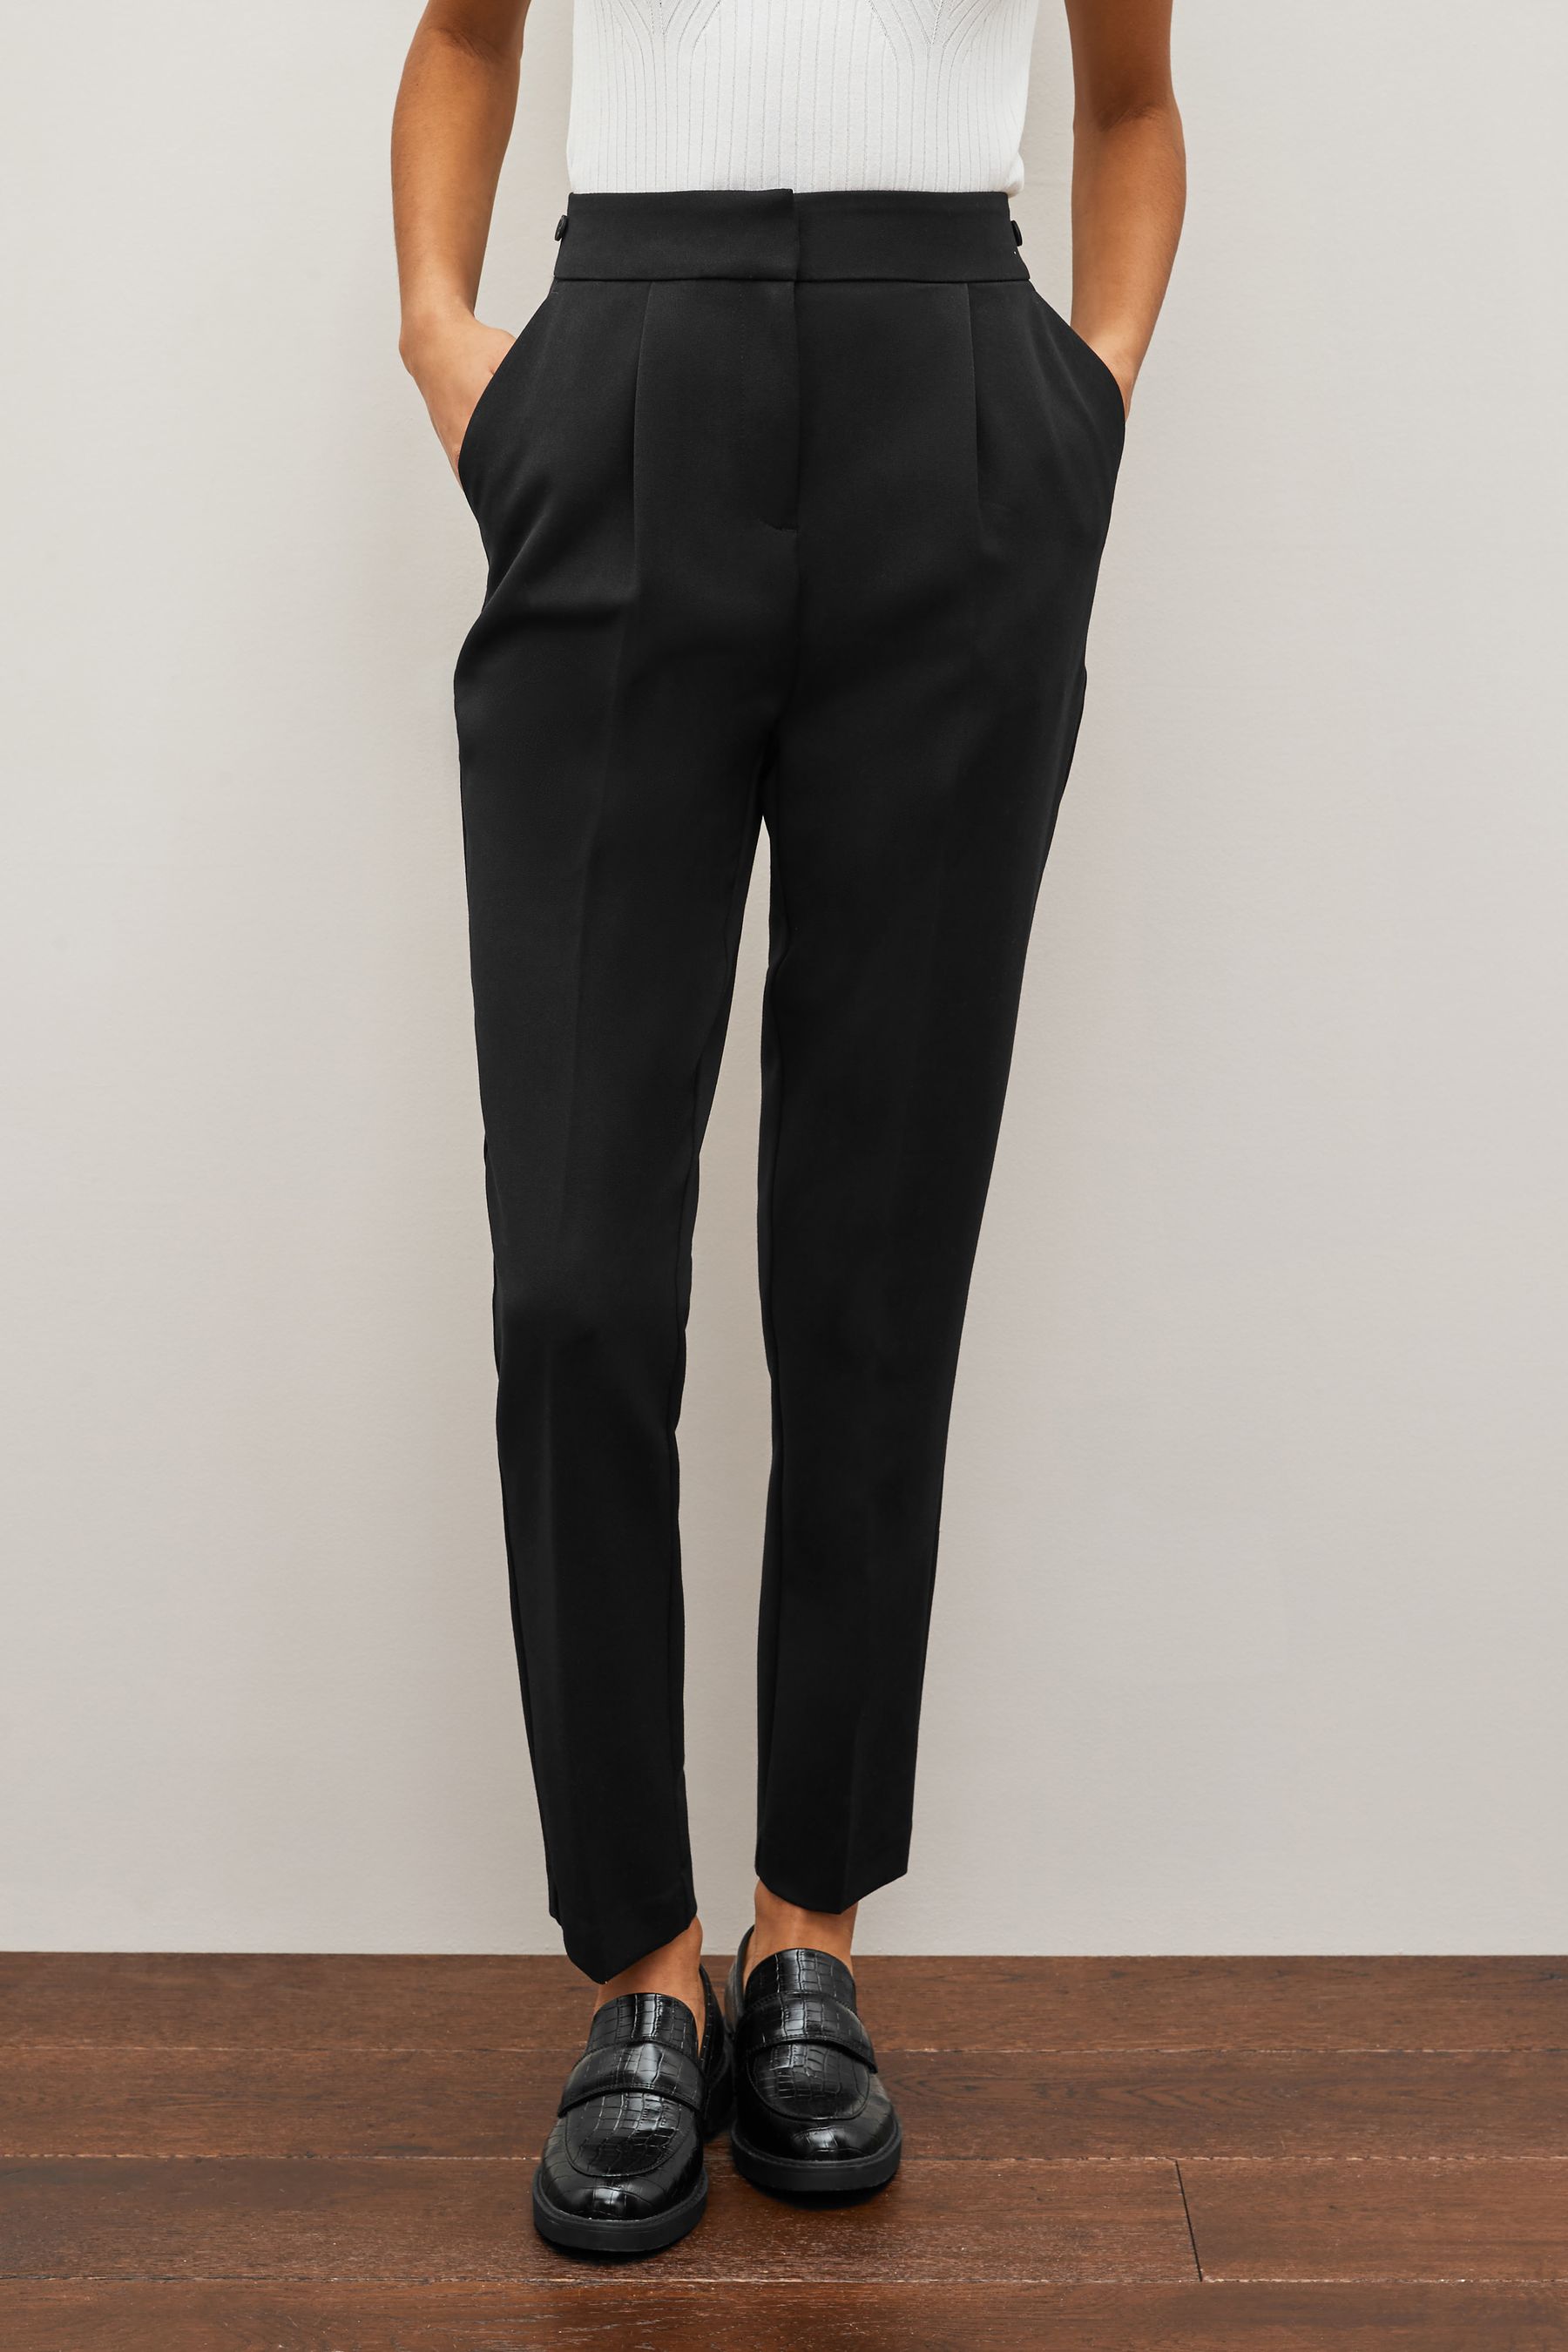 Buy Black Tailored Hourglass Slim Trousers from the Next UK online shop